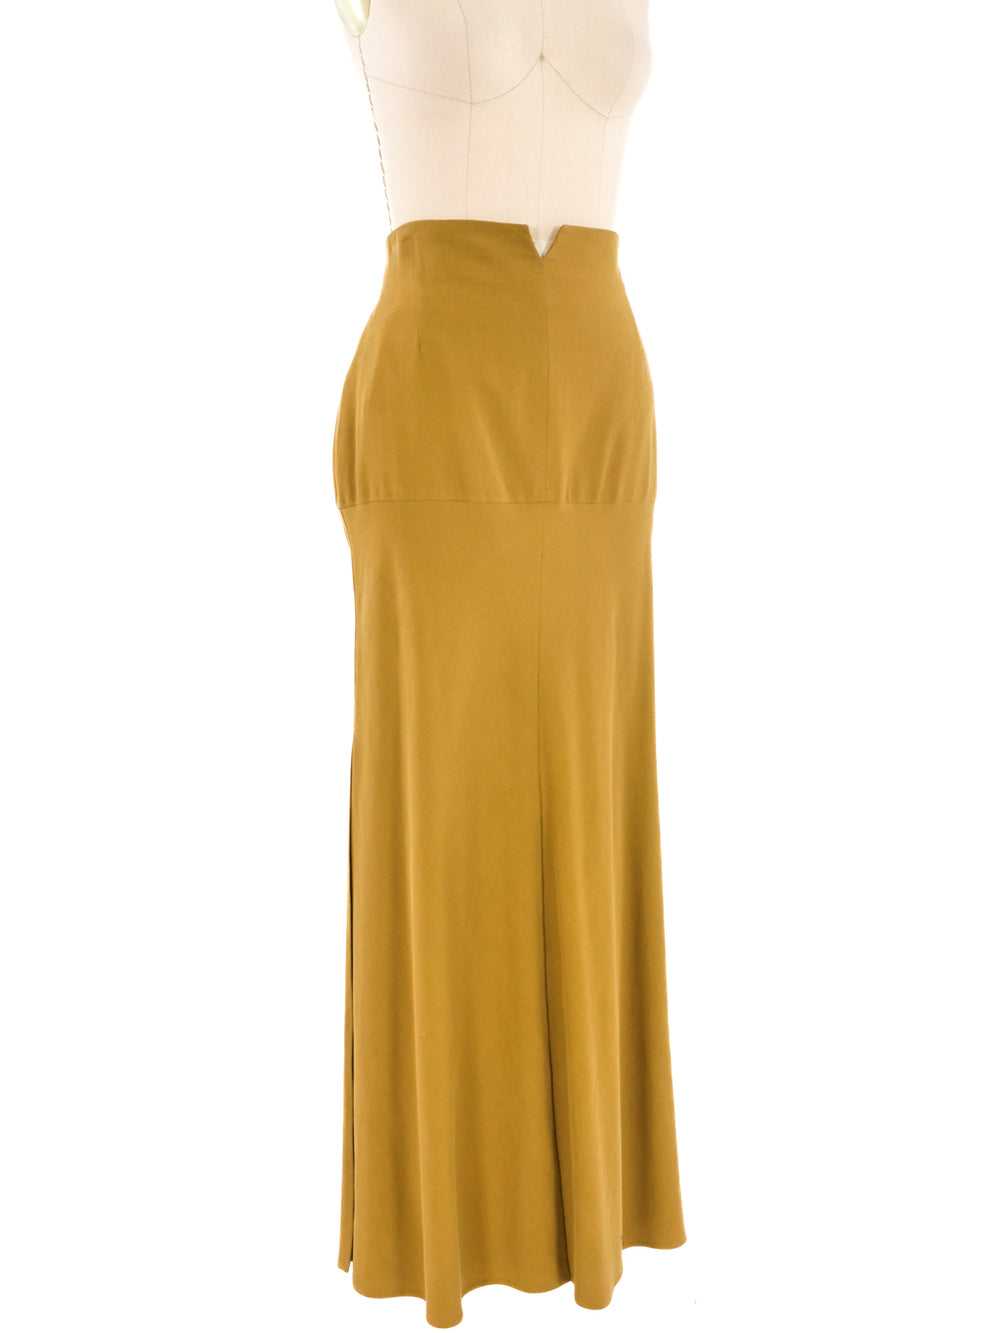 Romeo Gigli Suiting Inspired Maxi Skirt - image 3